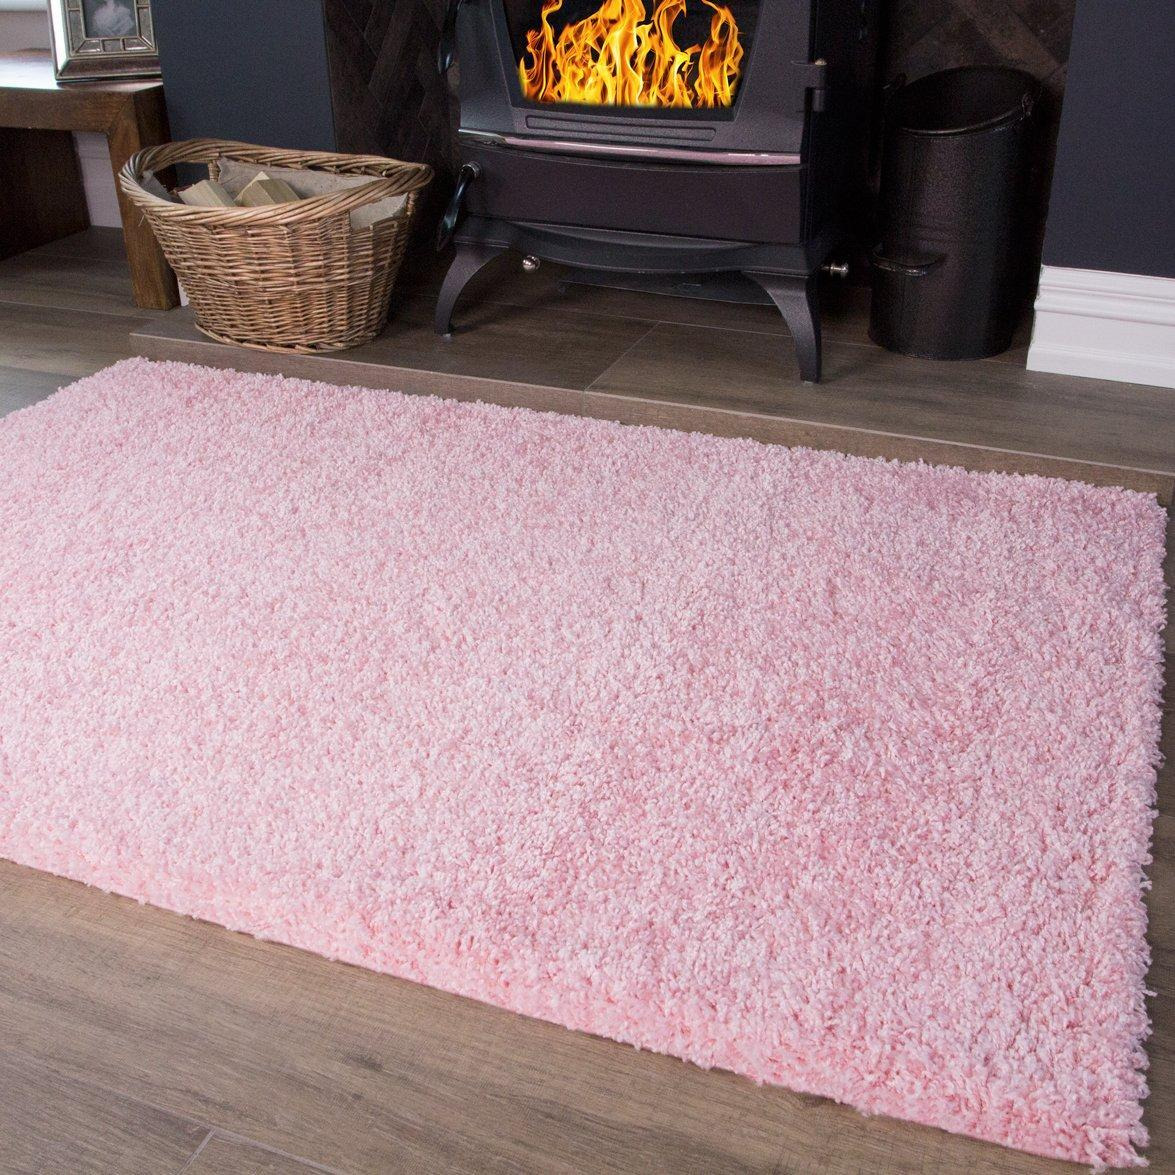 Baby Pink Soft Value Shaggy Living Area Rug - image 1